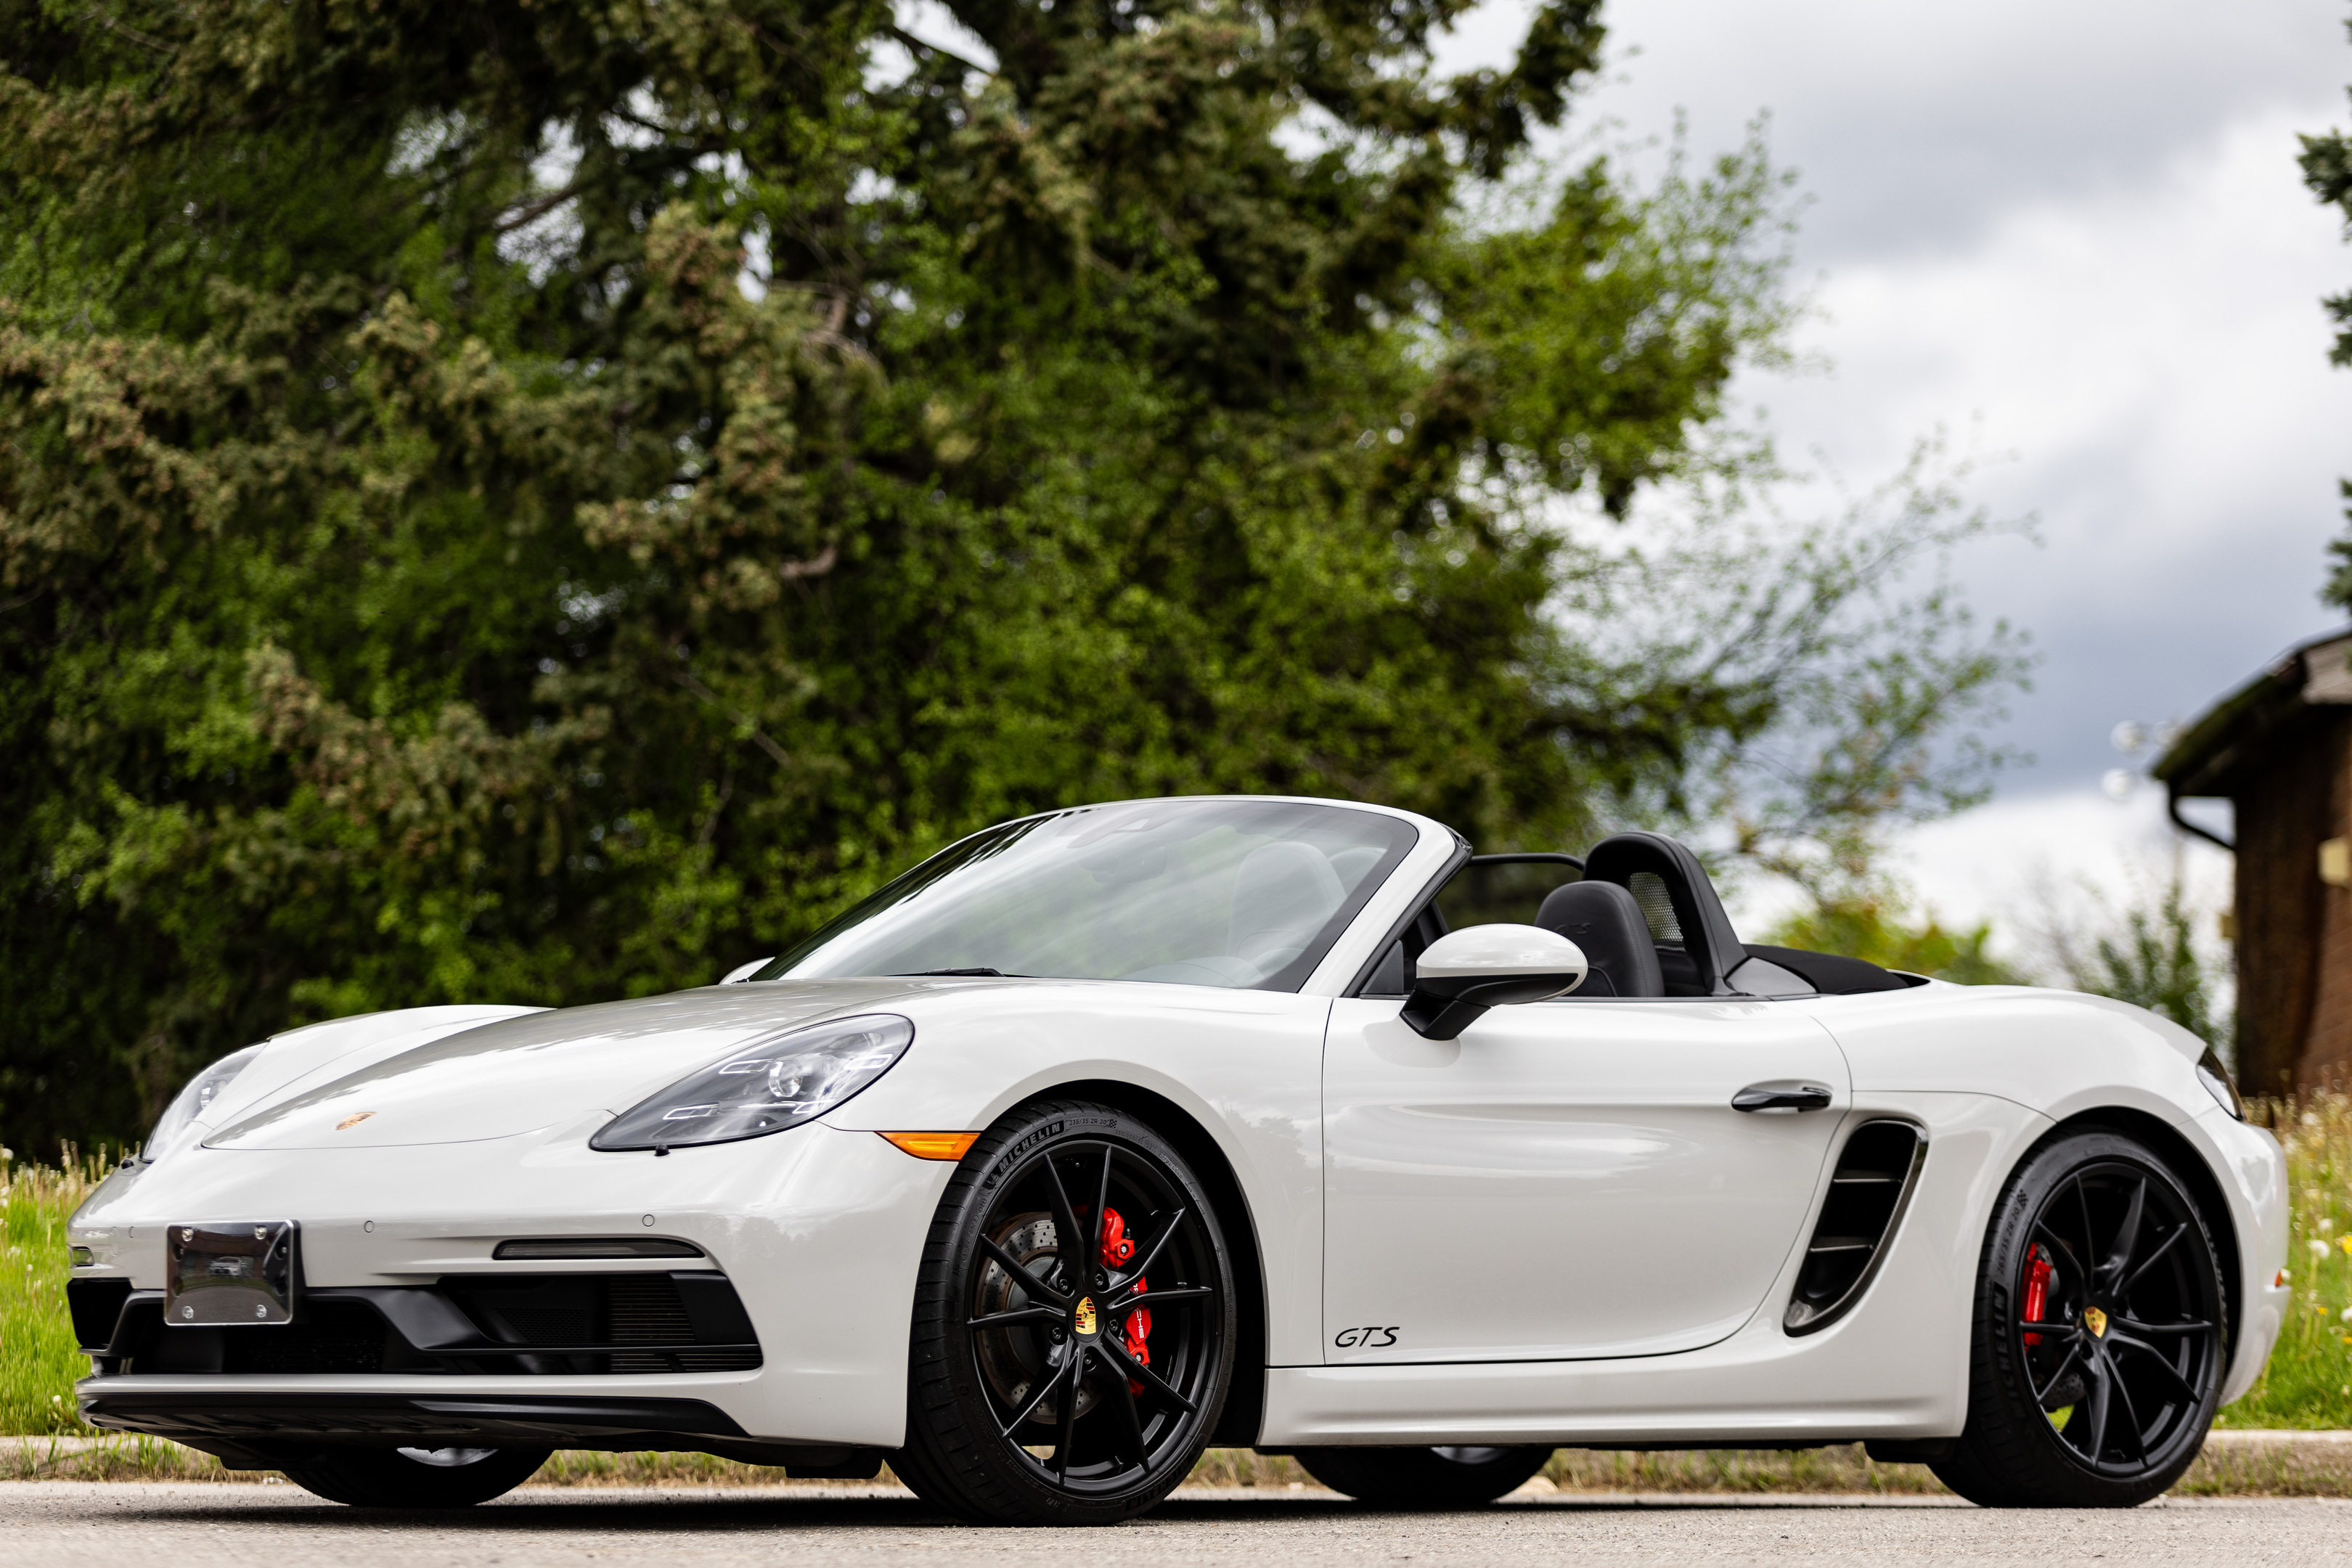 2018 Porsche 718 Boxster GTS Roadster, $20,000 in options, 1 of 110 